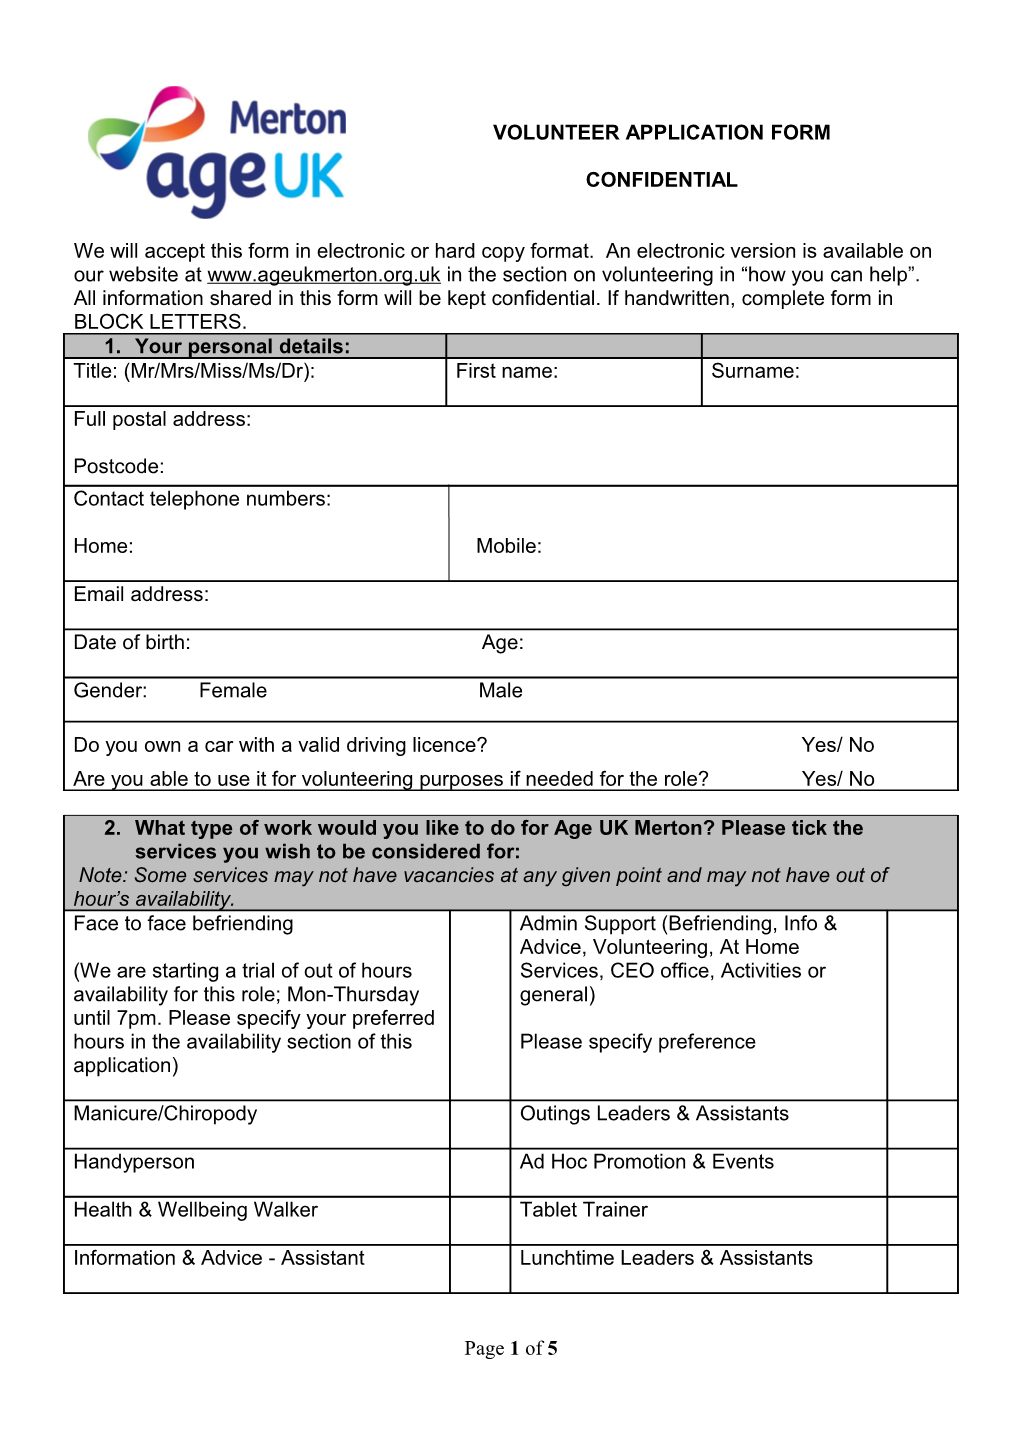 We Will Accept This Form in Electronic Or Hard Copy Format. an Electronic Version Is Available